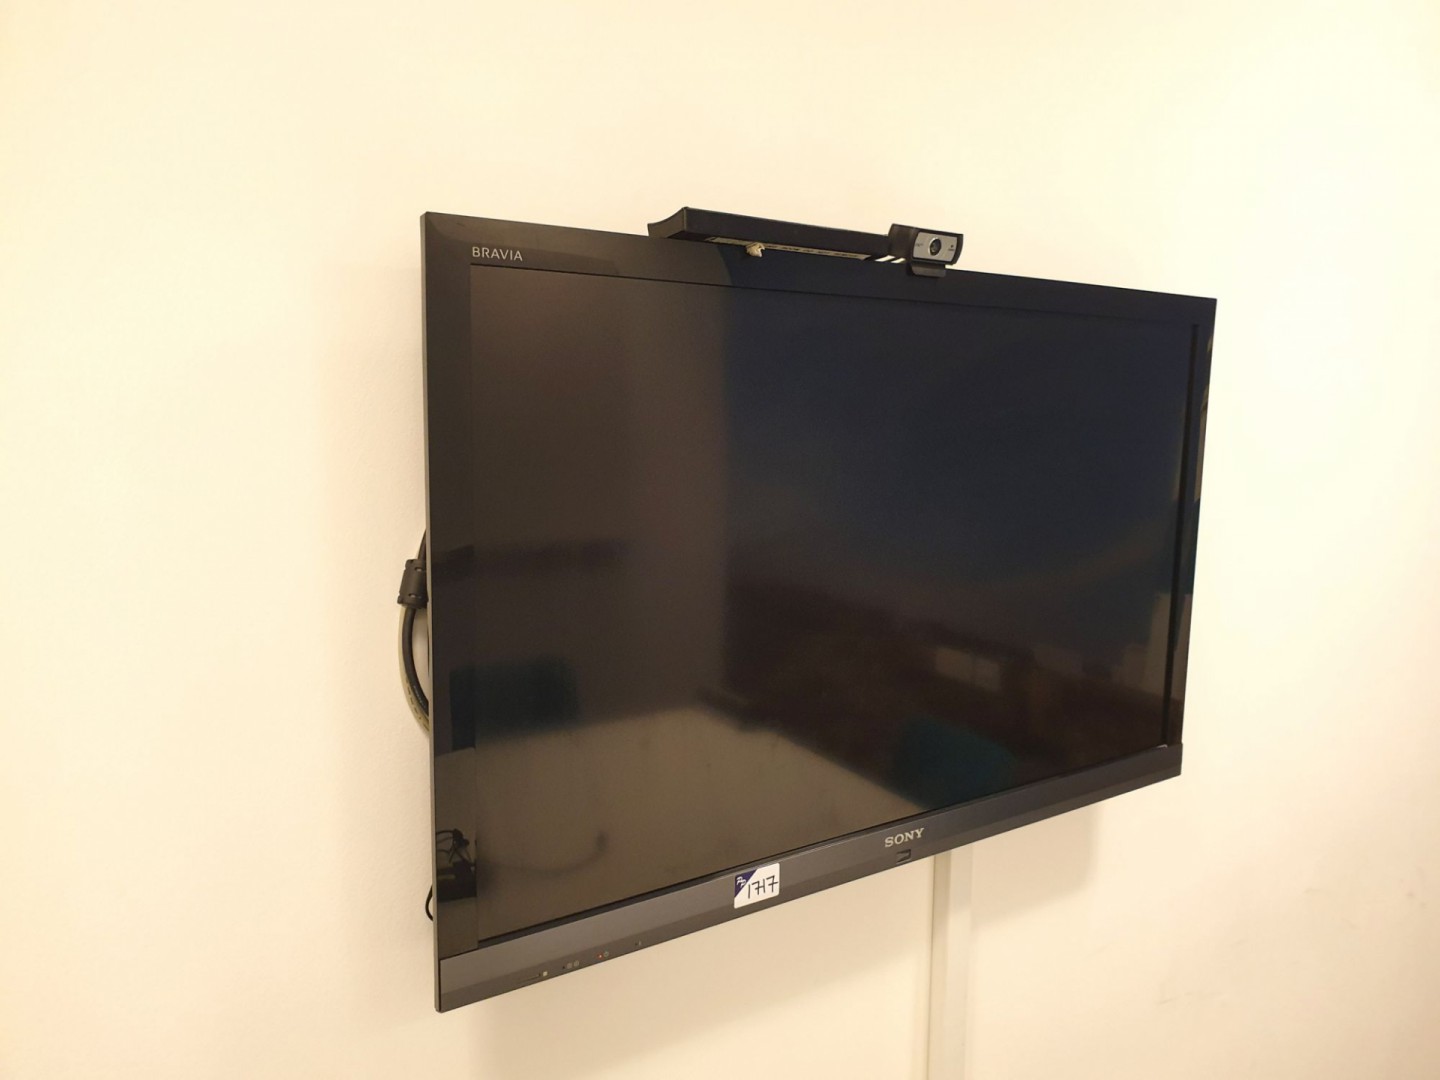 Sony Bravia 40" LCD TV on wall bracket with remote